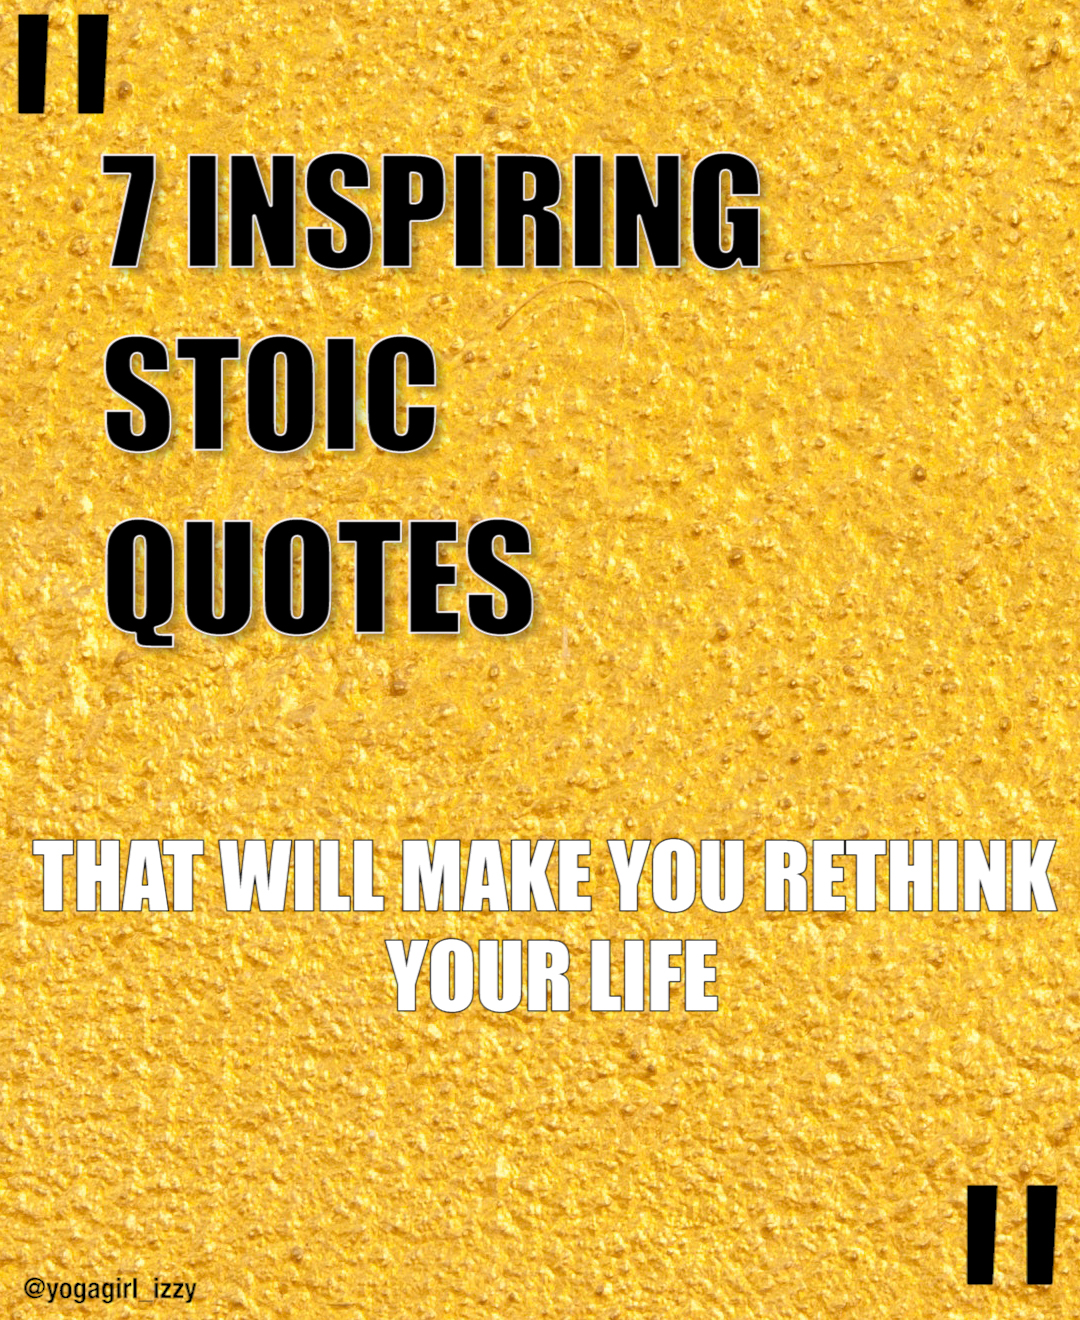 7 inspiring stoic quotes that will make you rethink your life